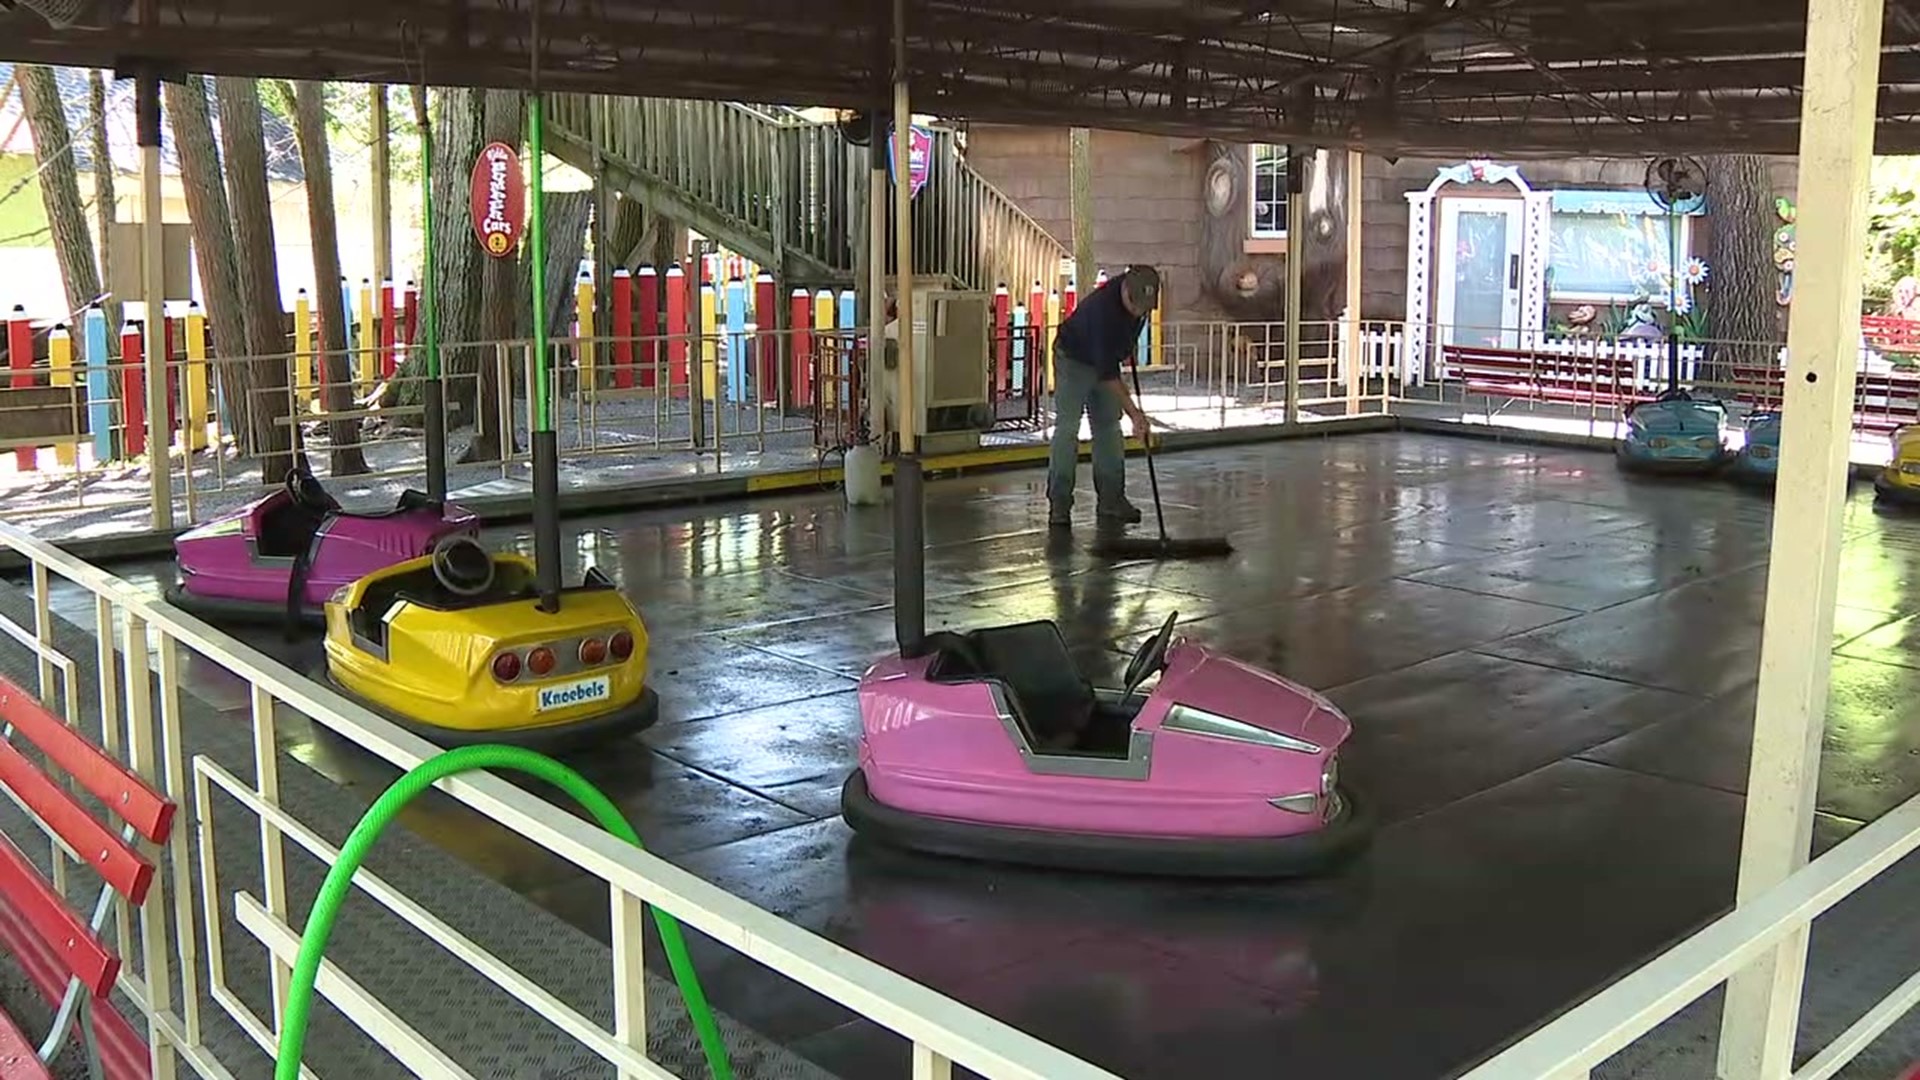 There was flooding in some spots, along with downed trees and power lines. Knoebels Amusement Resort remained closed for a second day.